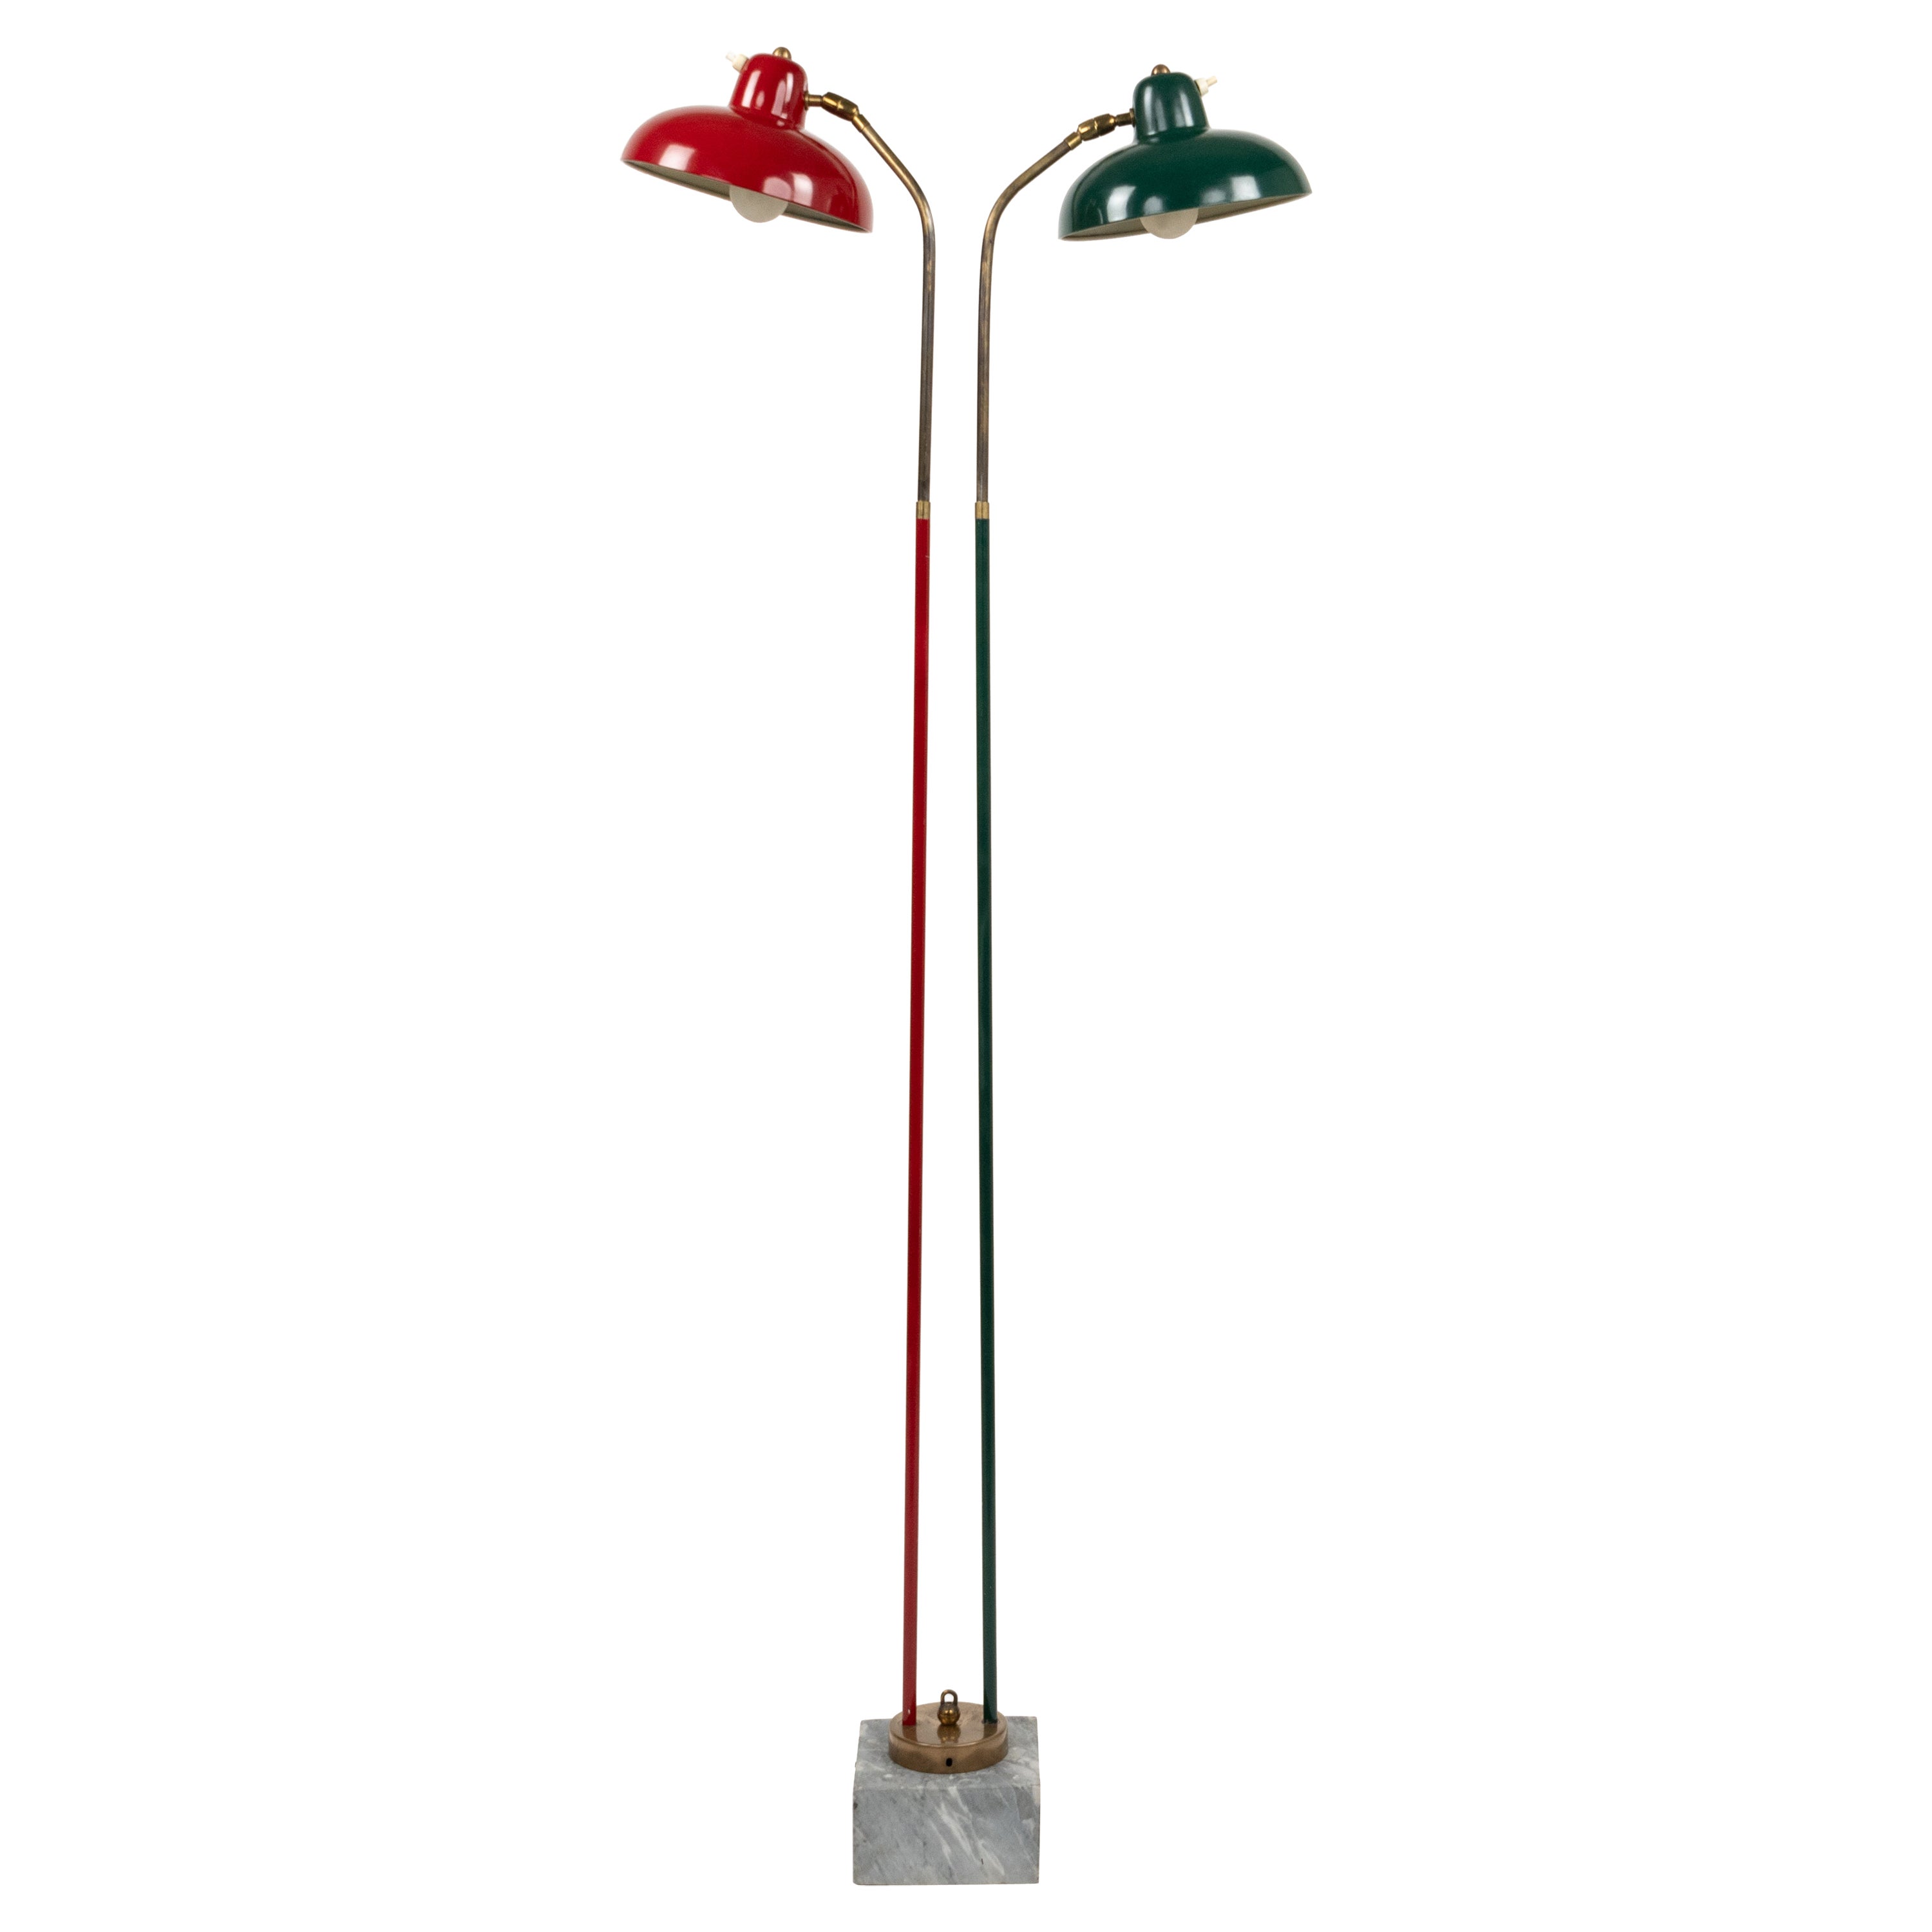 Floor Lamp in Marble, Lacquered Metal and Brass Stilnovo Style, Italy 1950s For Sale